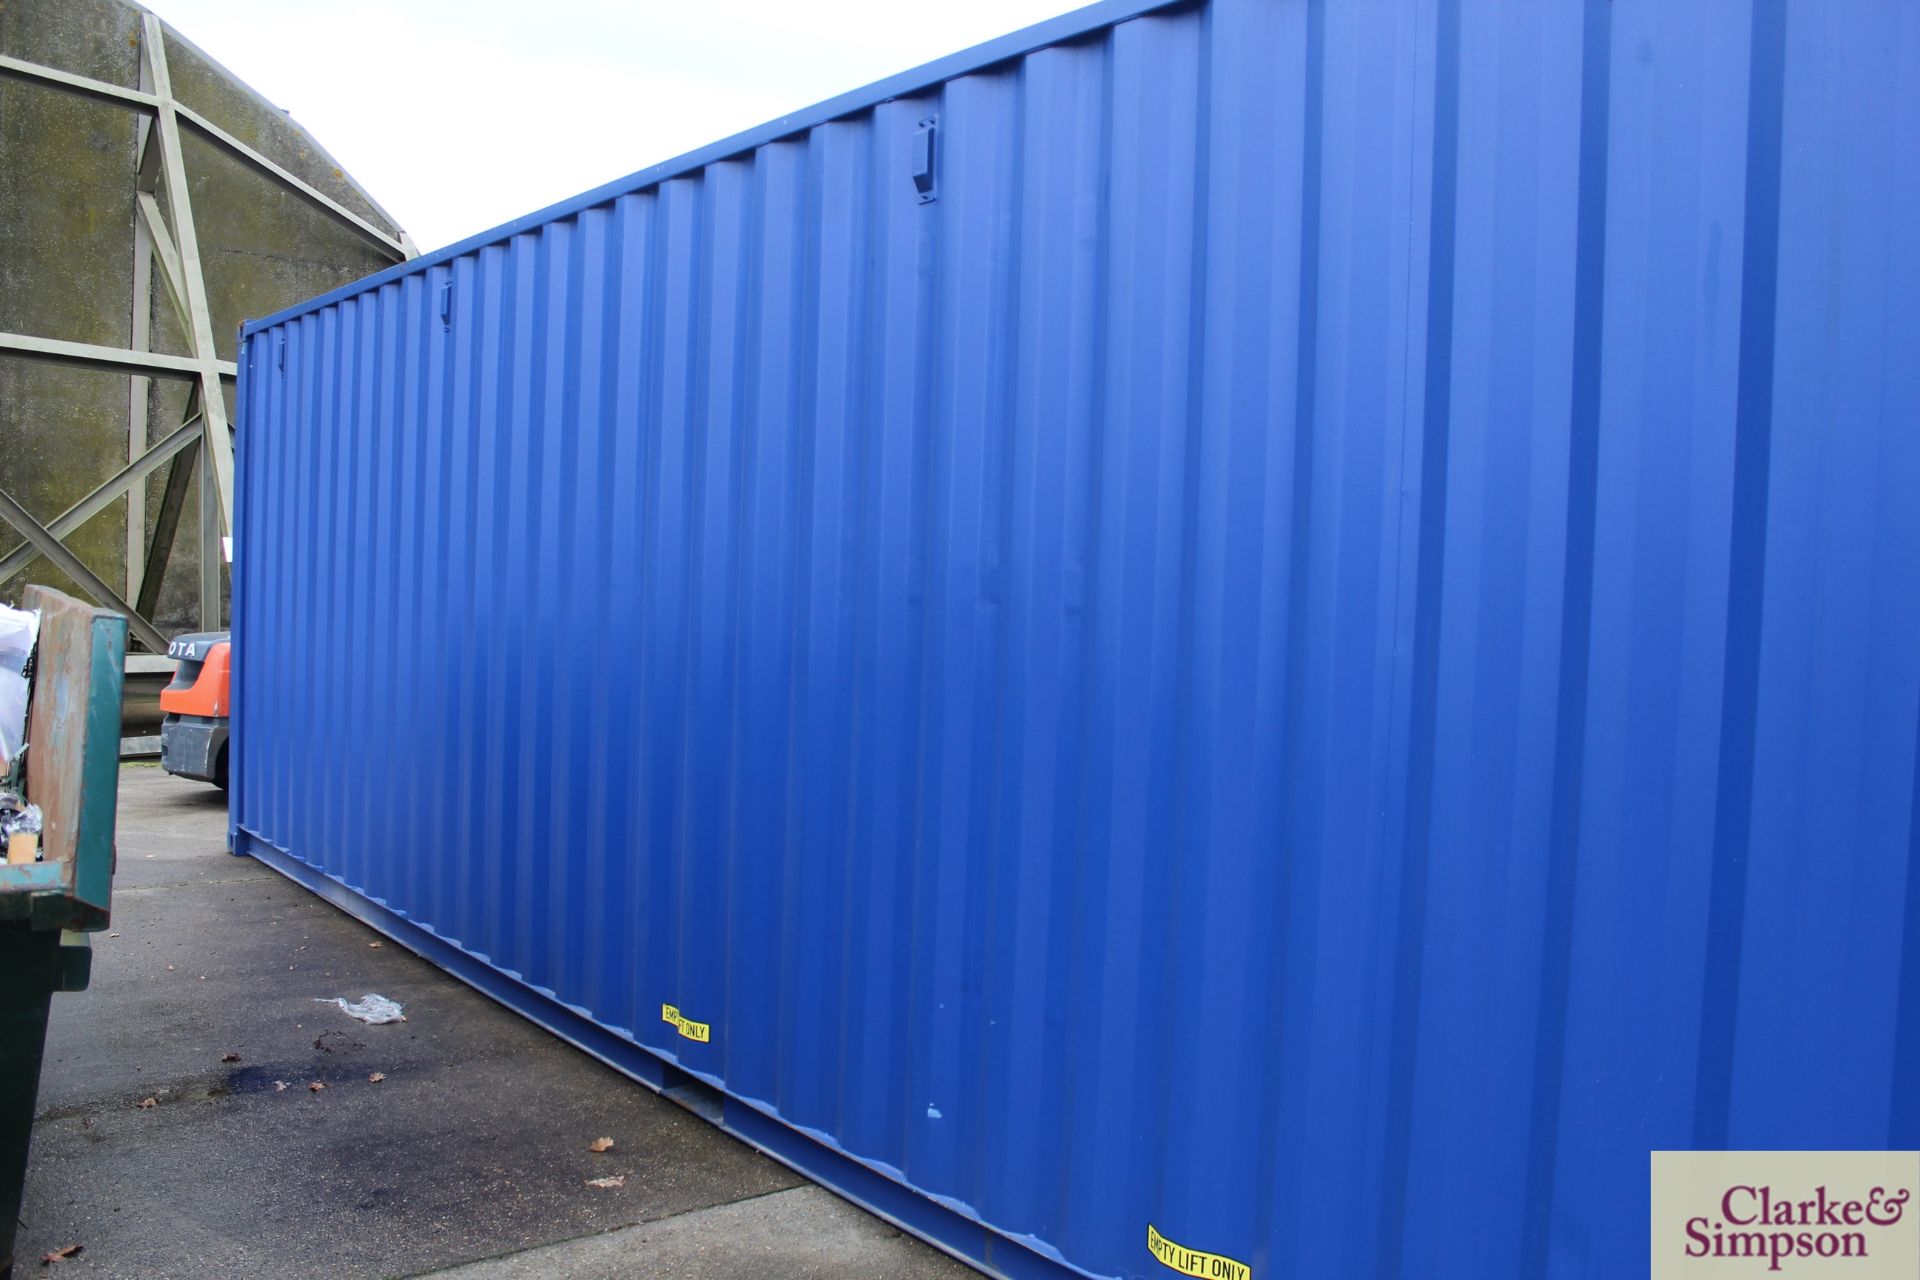 40ft x 9ft6in high shipping container. 2019. Heavily reinforced to interior to include plates - Image 4 of 16